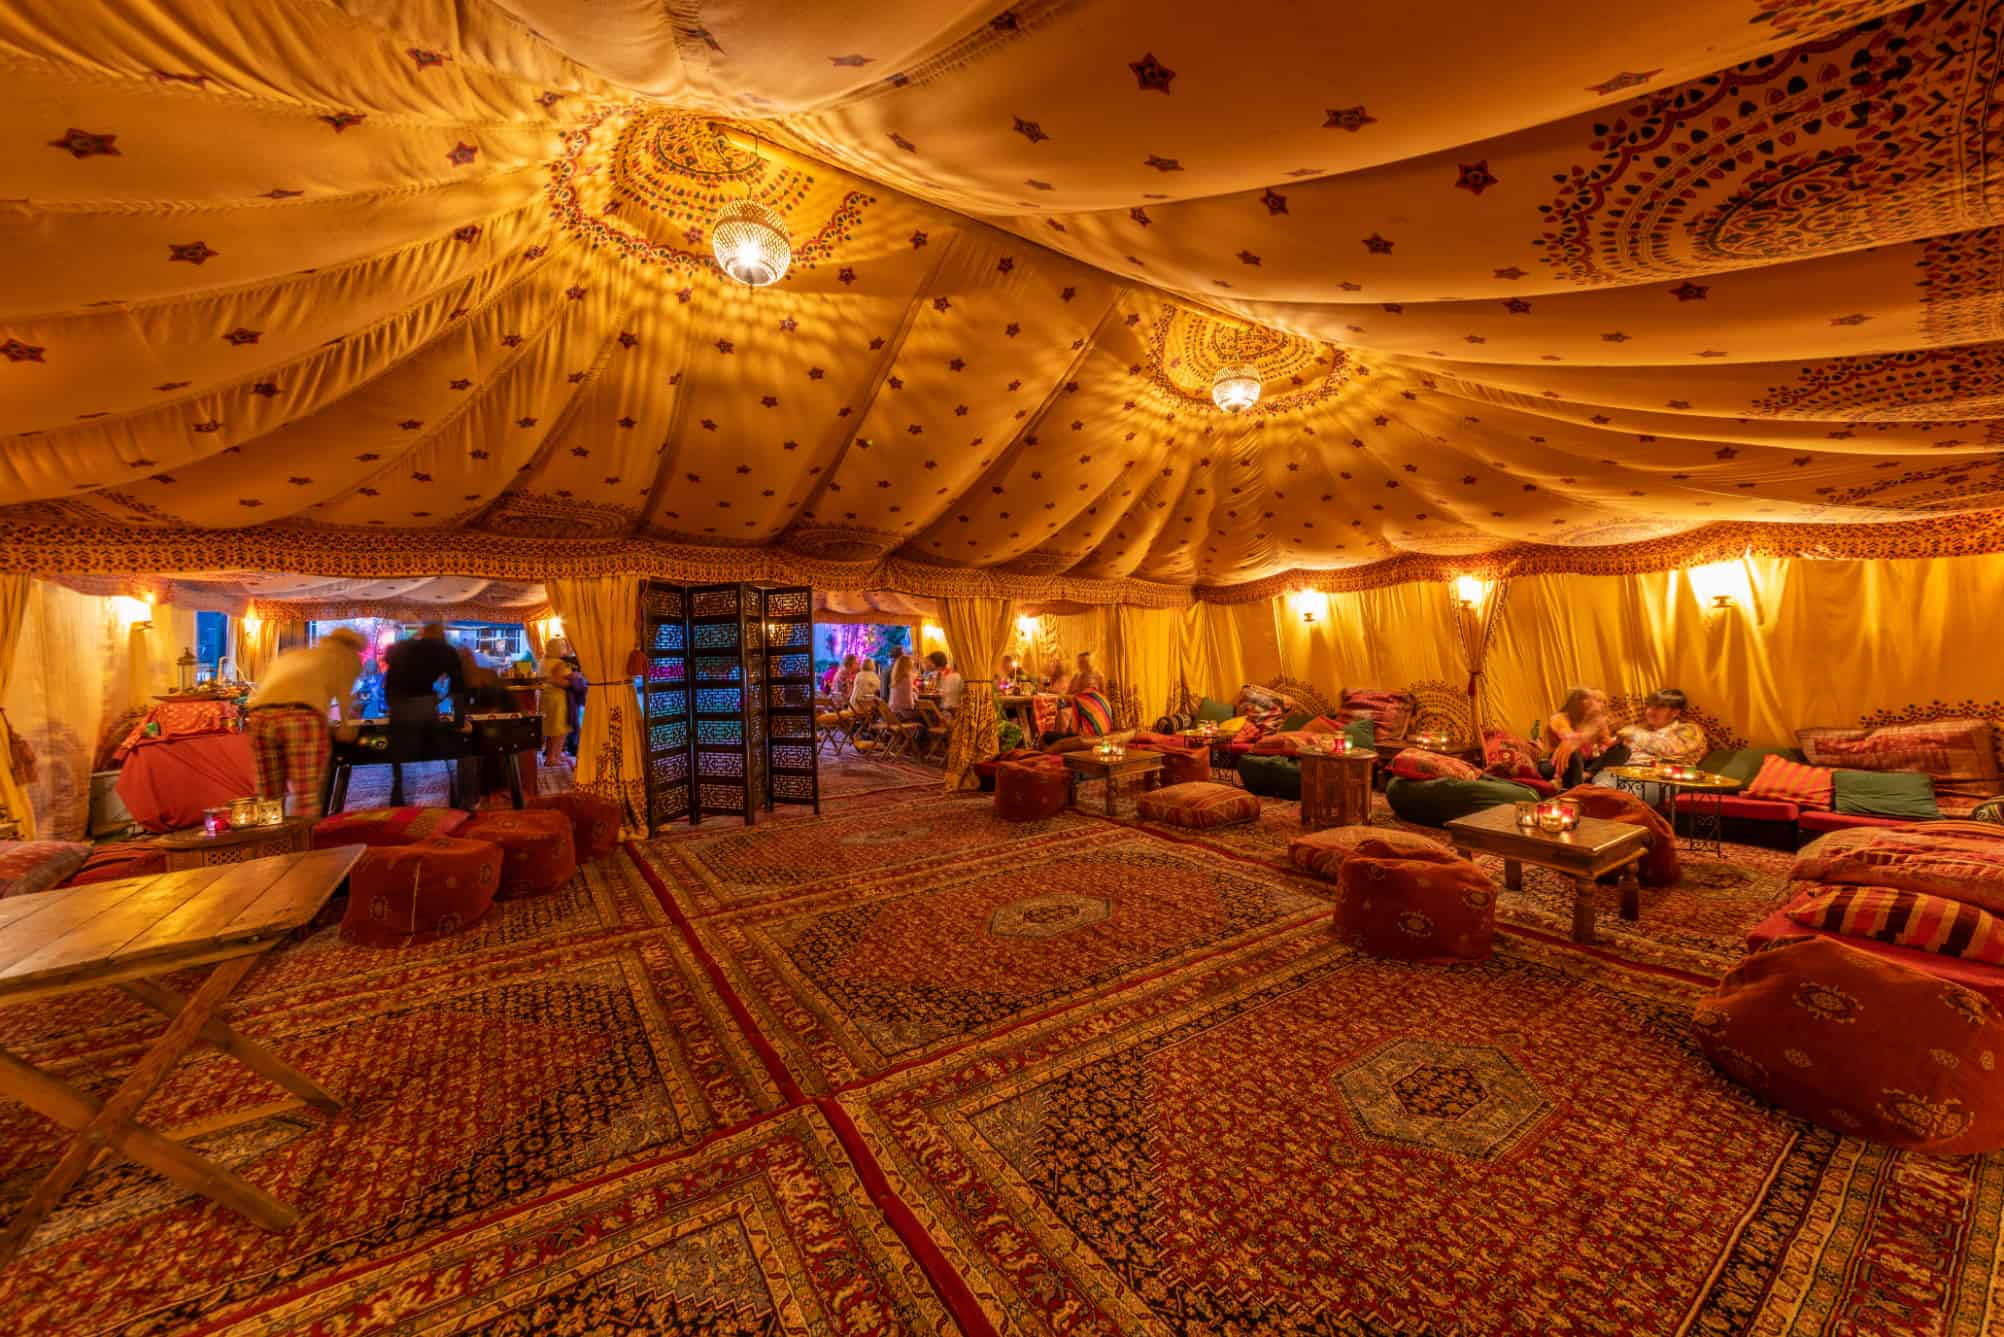 Inside an Arabian tent with persian rugs